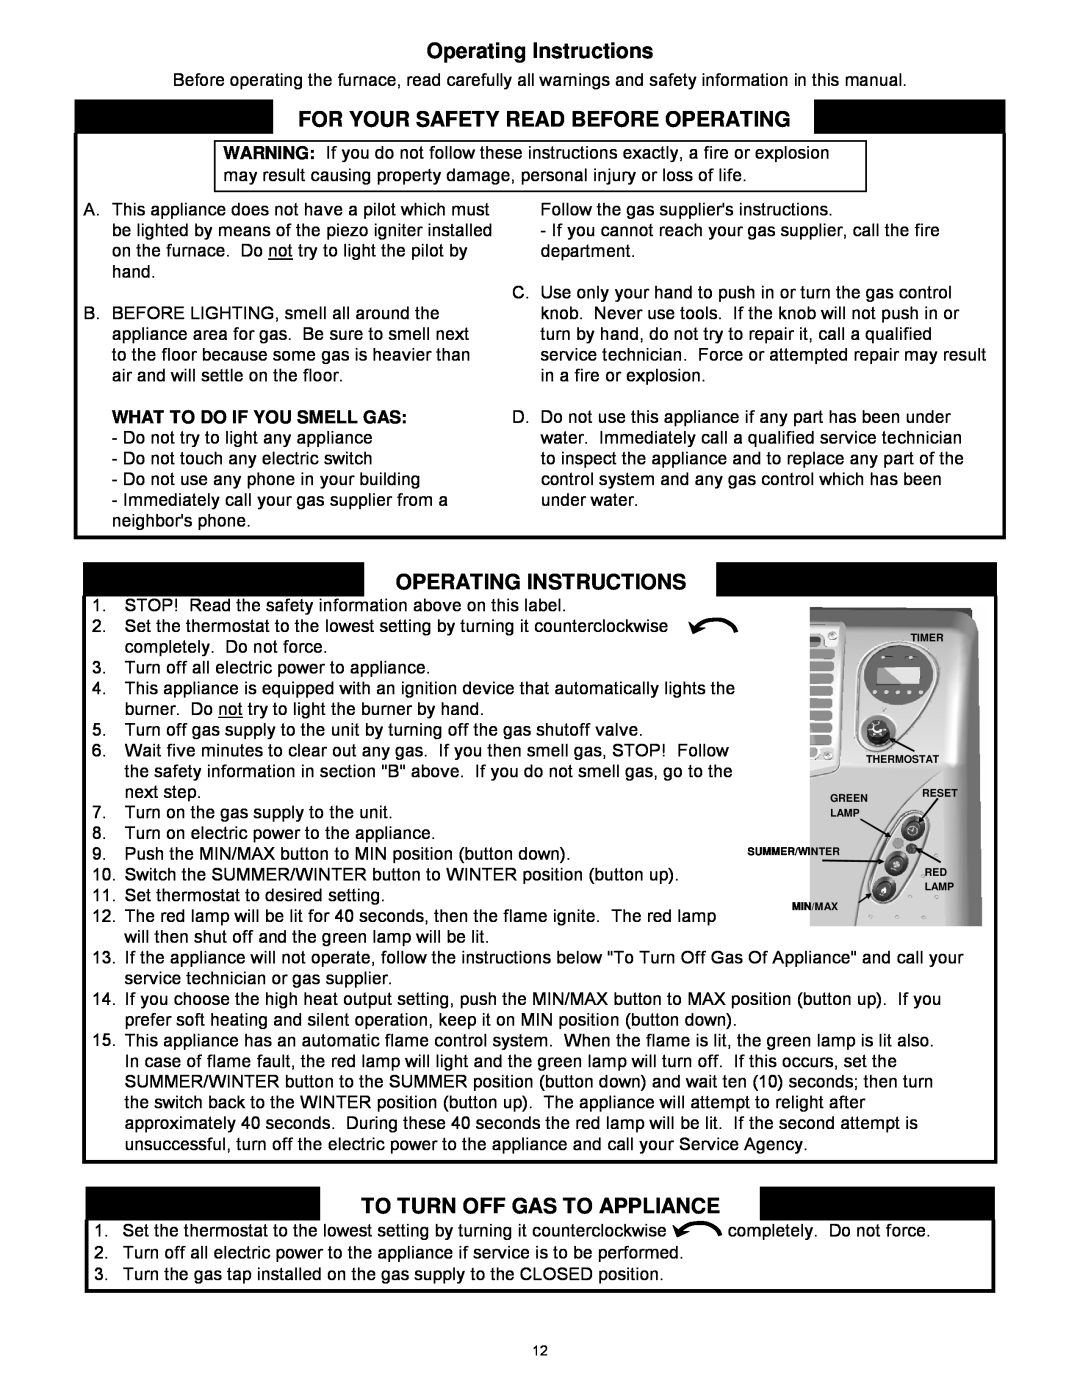 Williams 1773511, 1773512 Operating Instructions, For Your Safety Read Before Operating, To Turn Off Gas To Appliance 